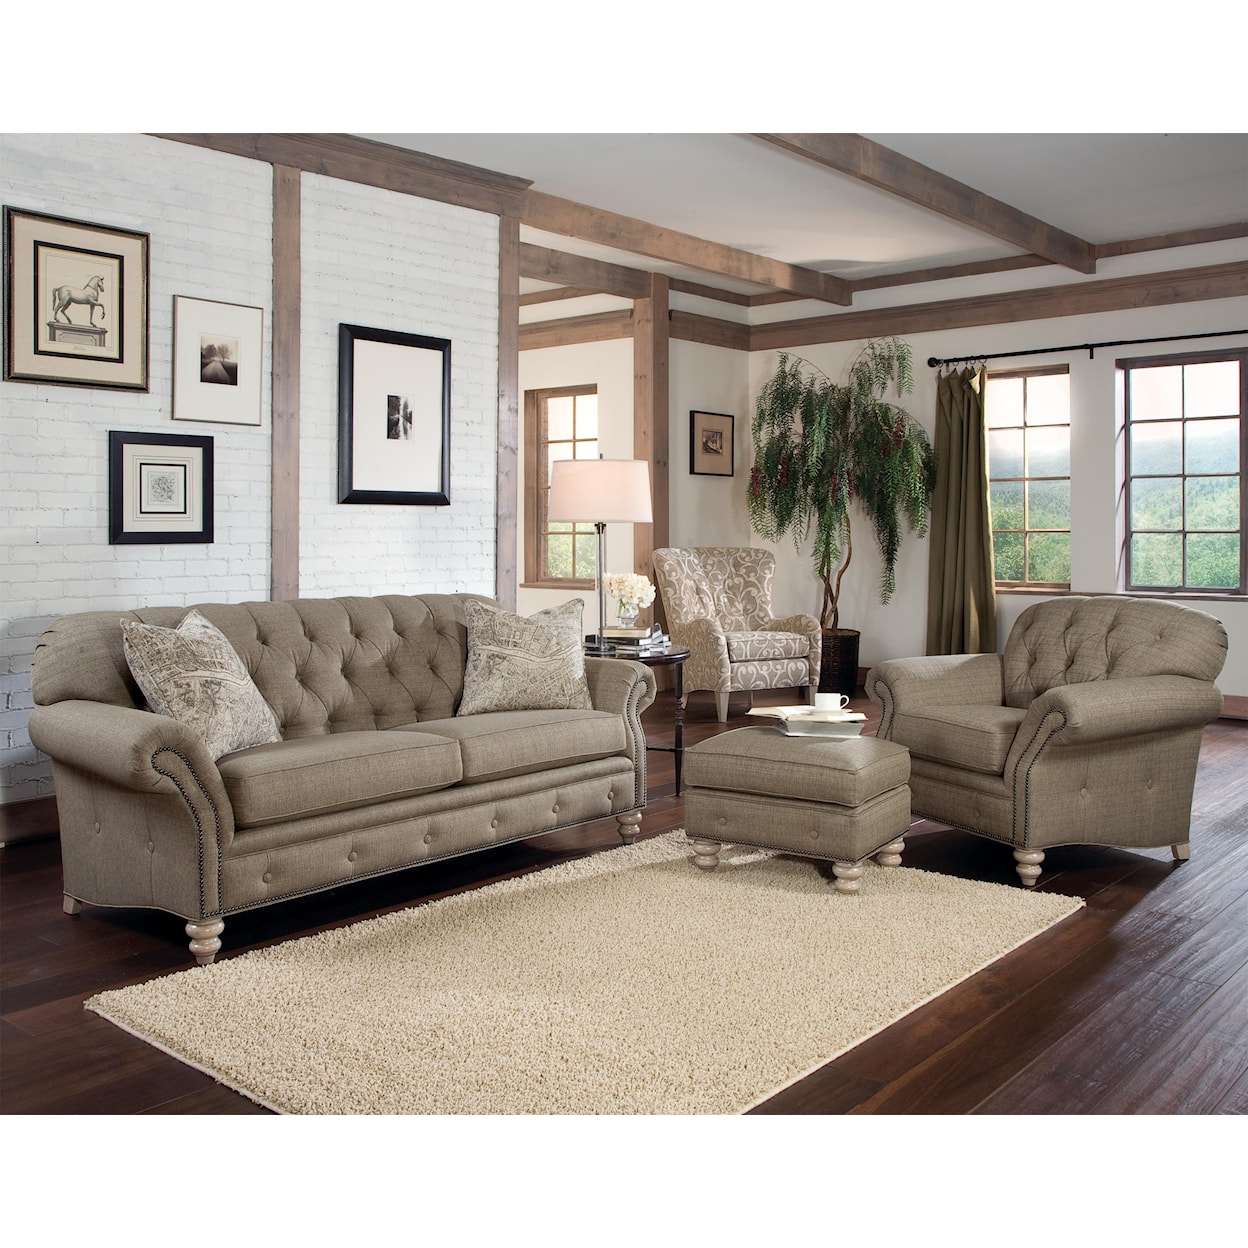 Smith Brothers 396 chair & ottoman